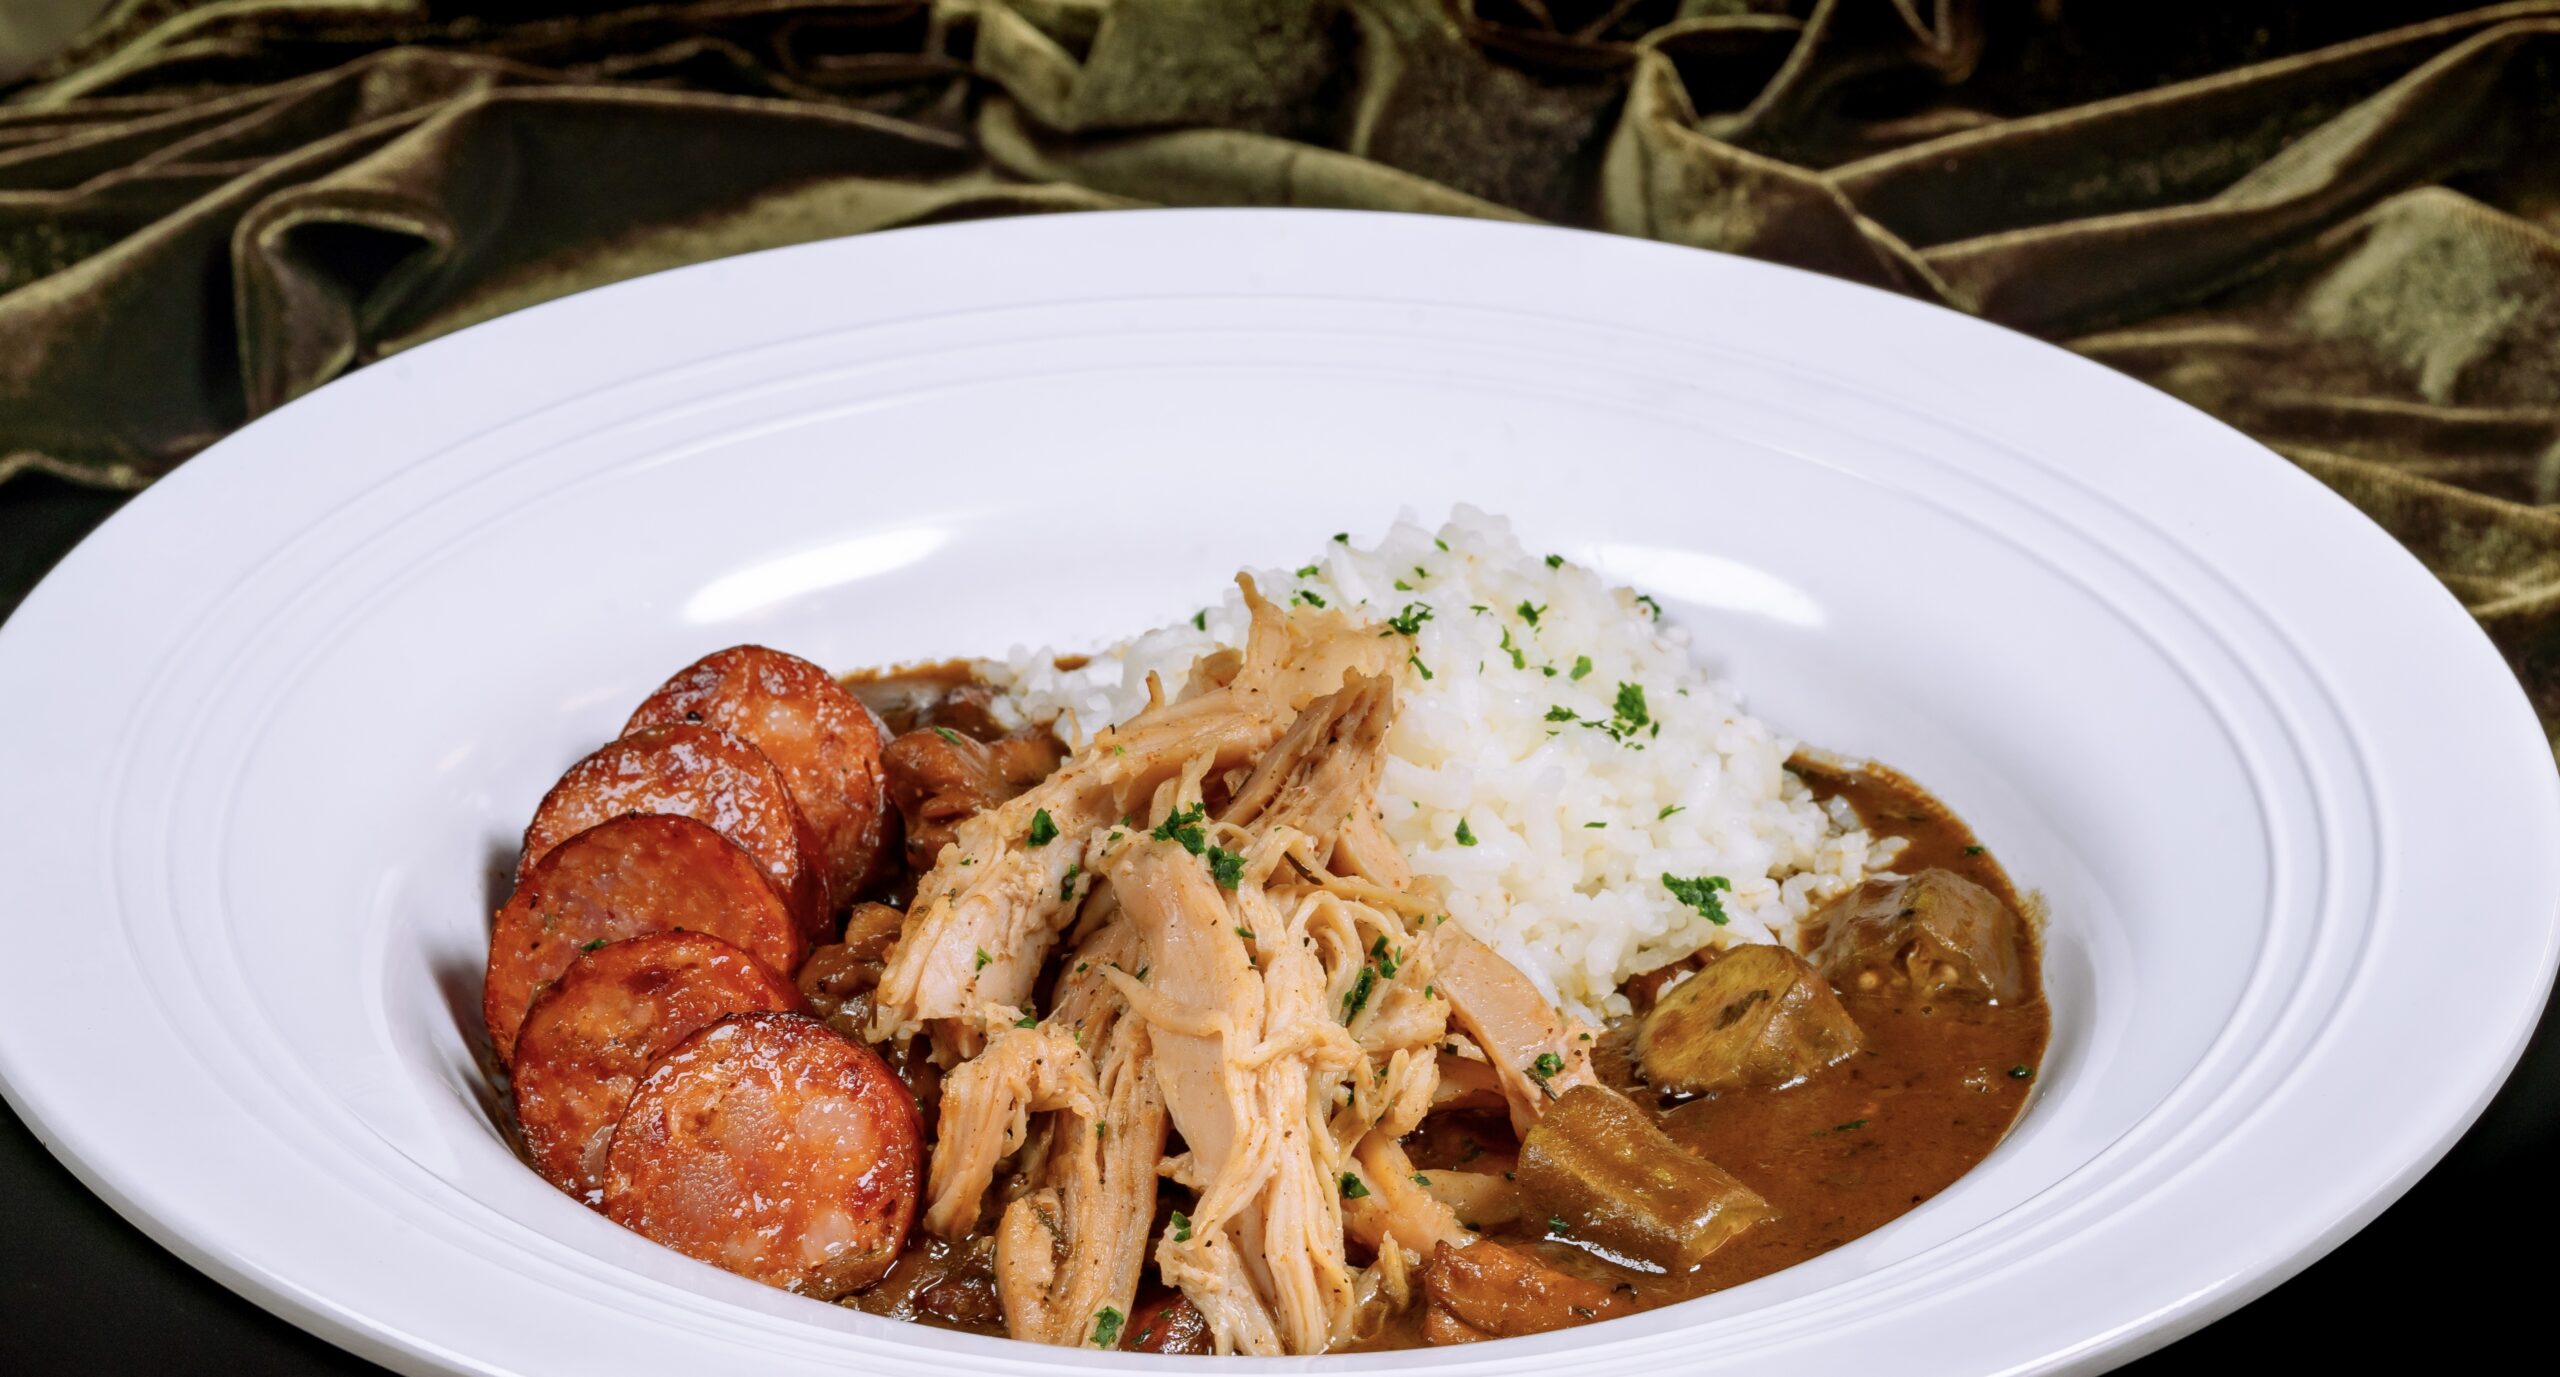 Celebrate National Gumbo Day the Disney Way: Learn Chef Toby Hollis’ House Gumbo Recipe from Tiana’s Palace!